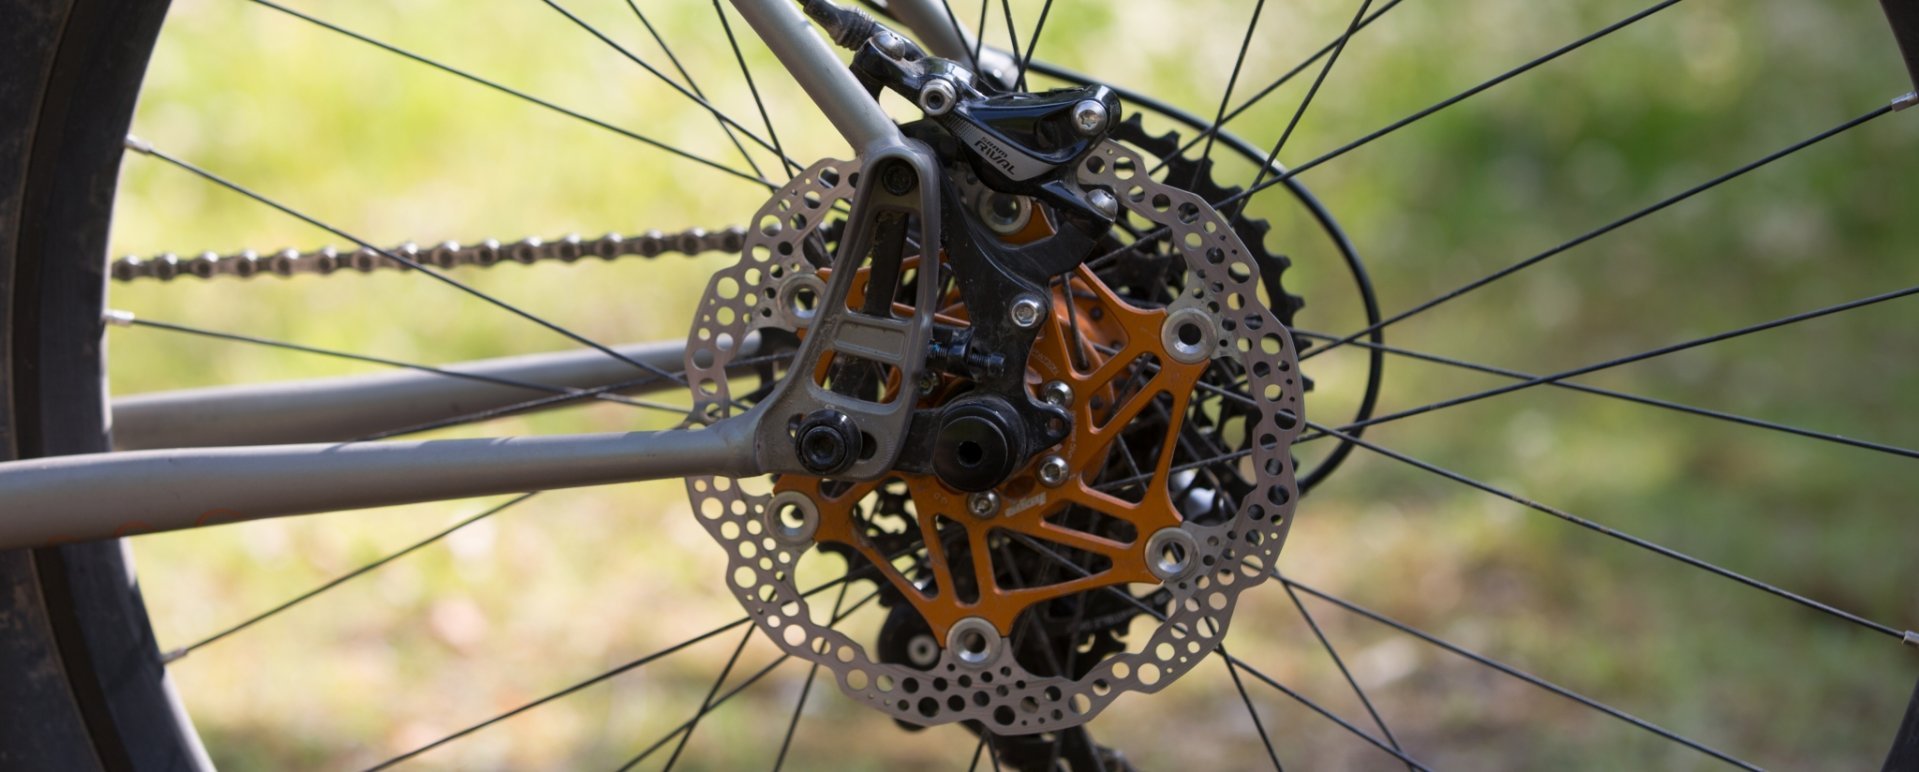 Rival 1 brakes and Hope floating rotors bring the Salsa Fargo to a safe and controlled stop.